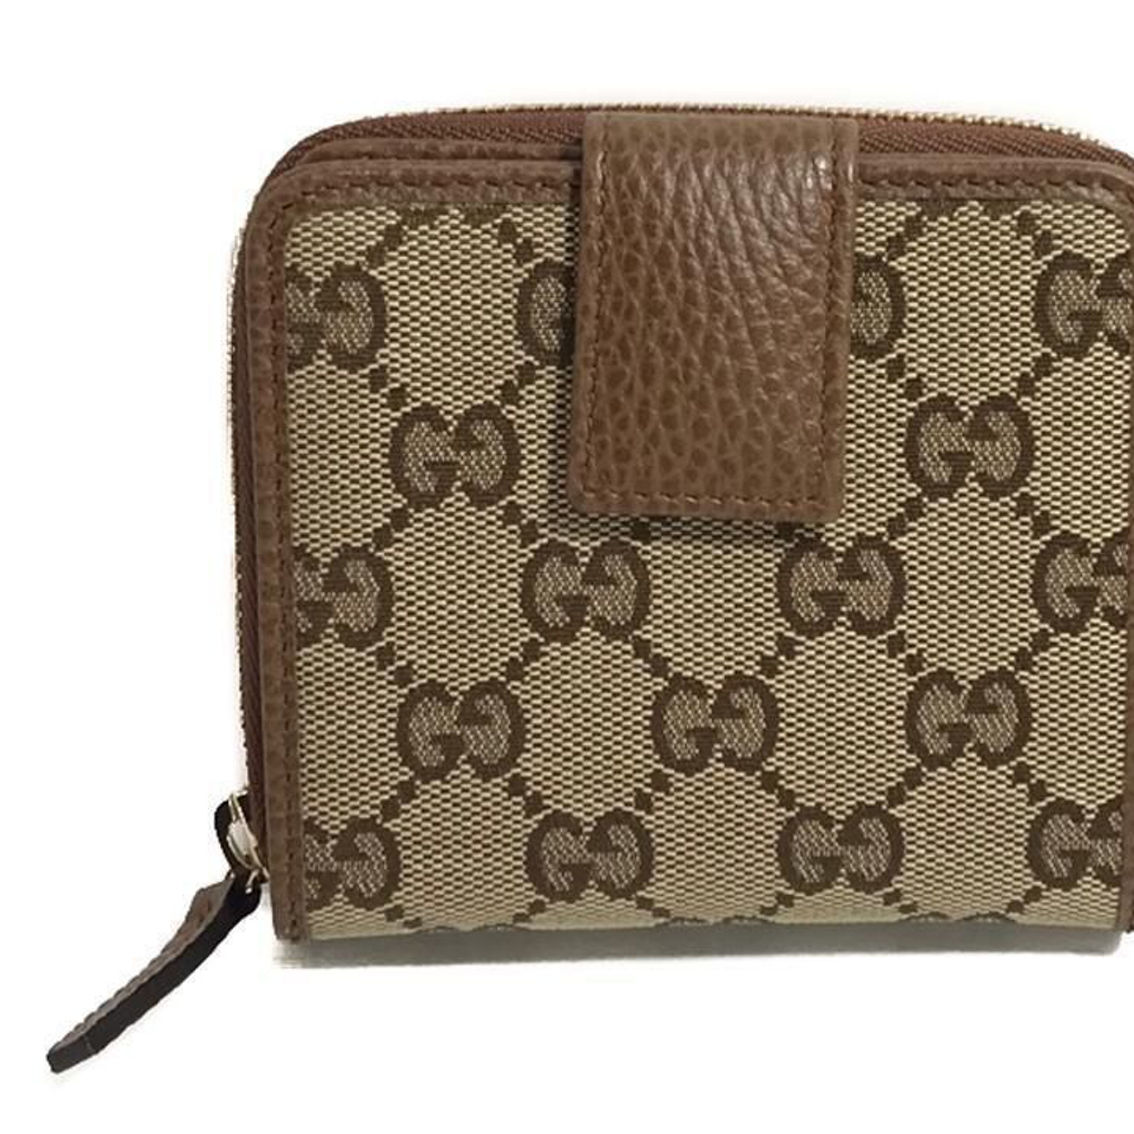 Gucci Information Guide - GUCCI GG Canvas Leather Boat Bag Hand